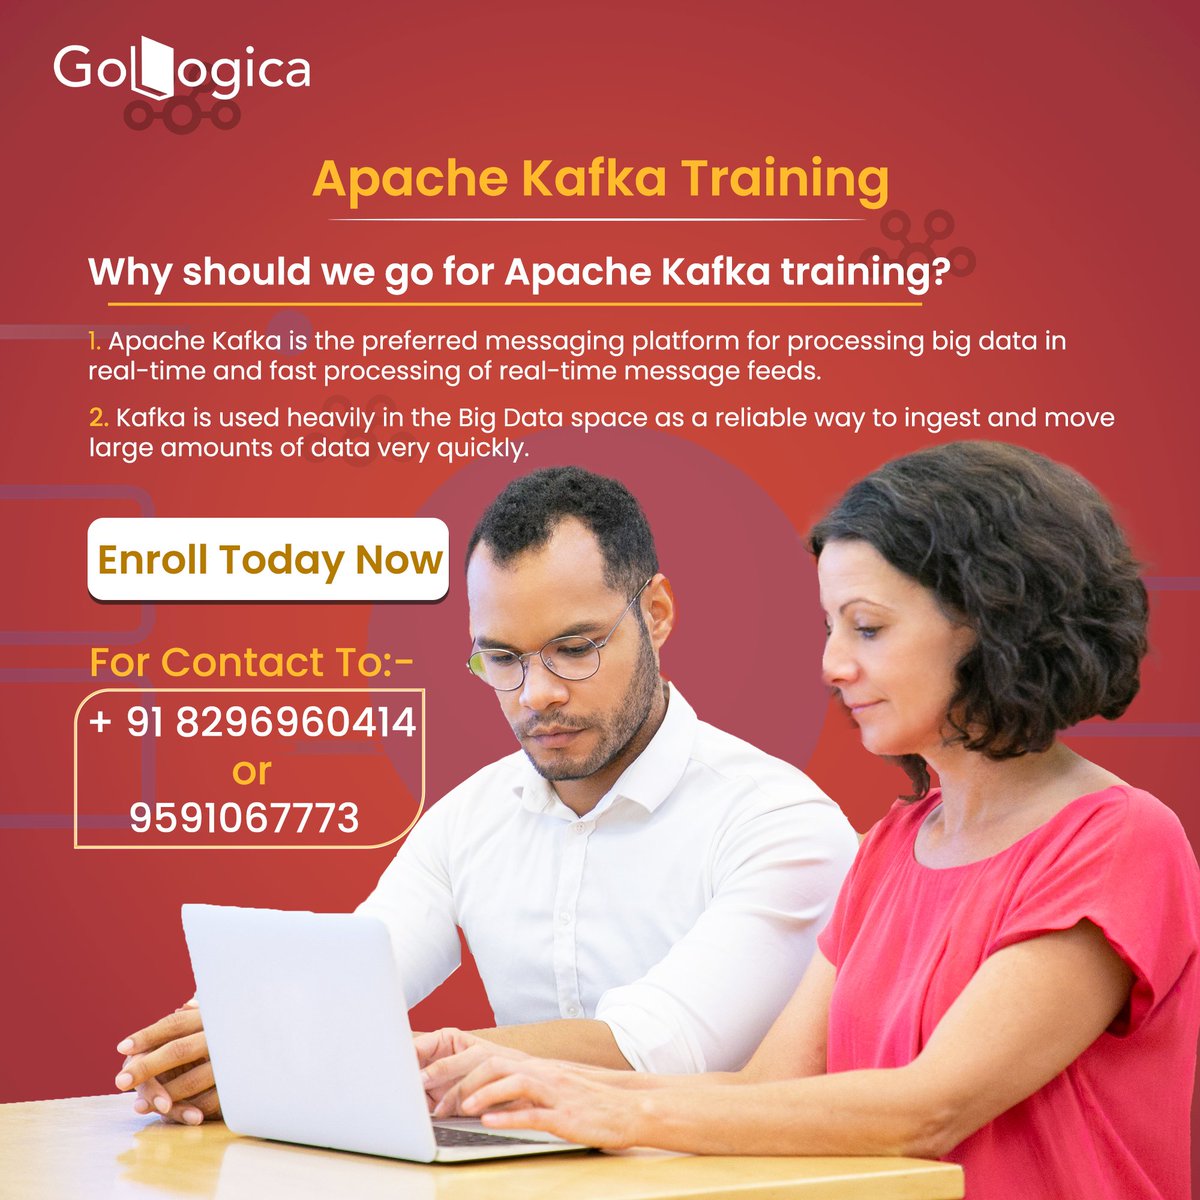 Master the heart of real-time data streaming with our Apache Kafka Training!

For More Details: gologica.com/course/apache-…

#apachekafka #kafka #GoLogica #bigdata #streamingdata #dataprocessing #datamanagement #cloudnative #kafkastreams #kafkaconnect #apachek #eventstreaming